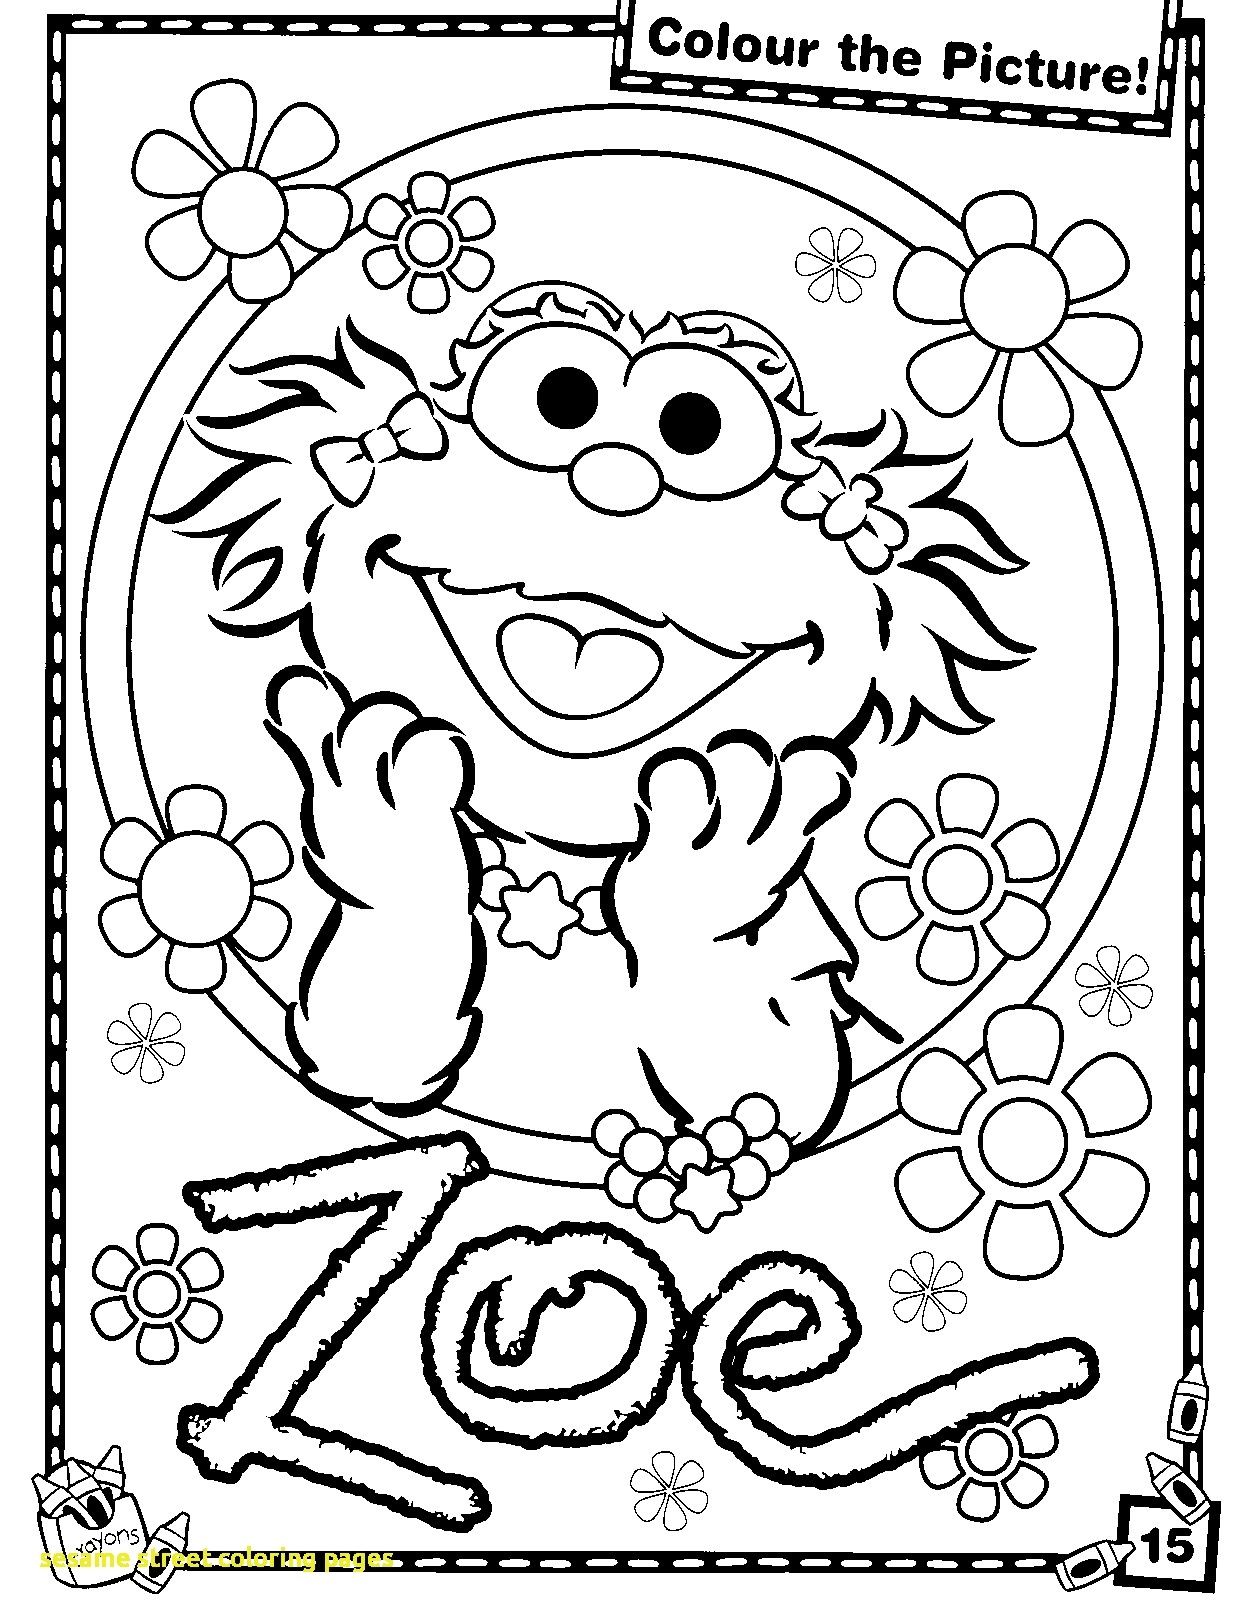 oscar-the-grouch-coloring-page-at-getcolorings-free-printable